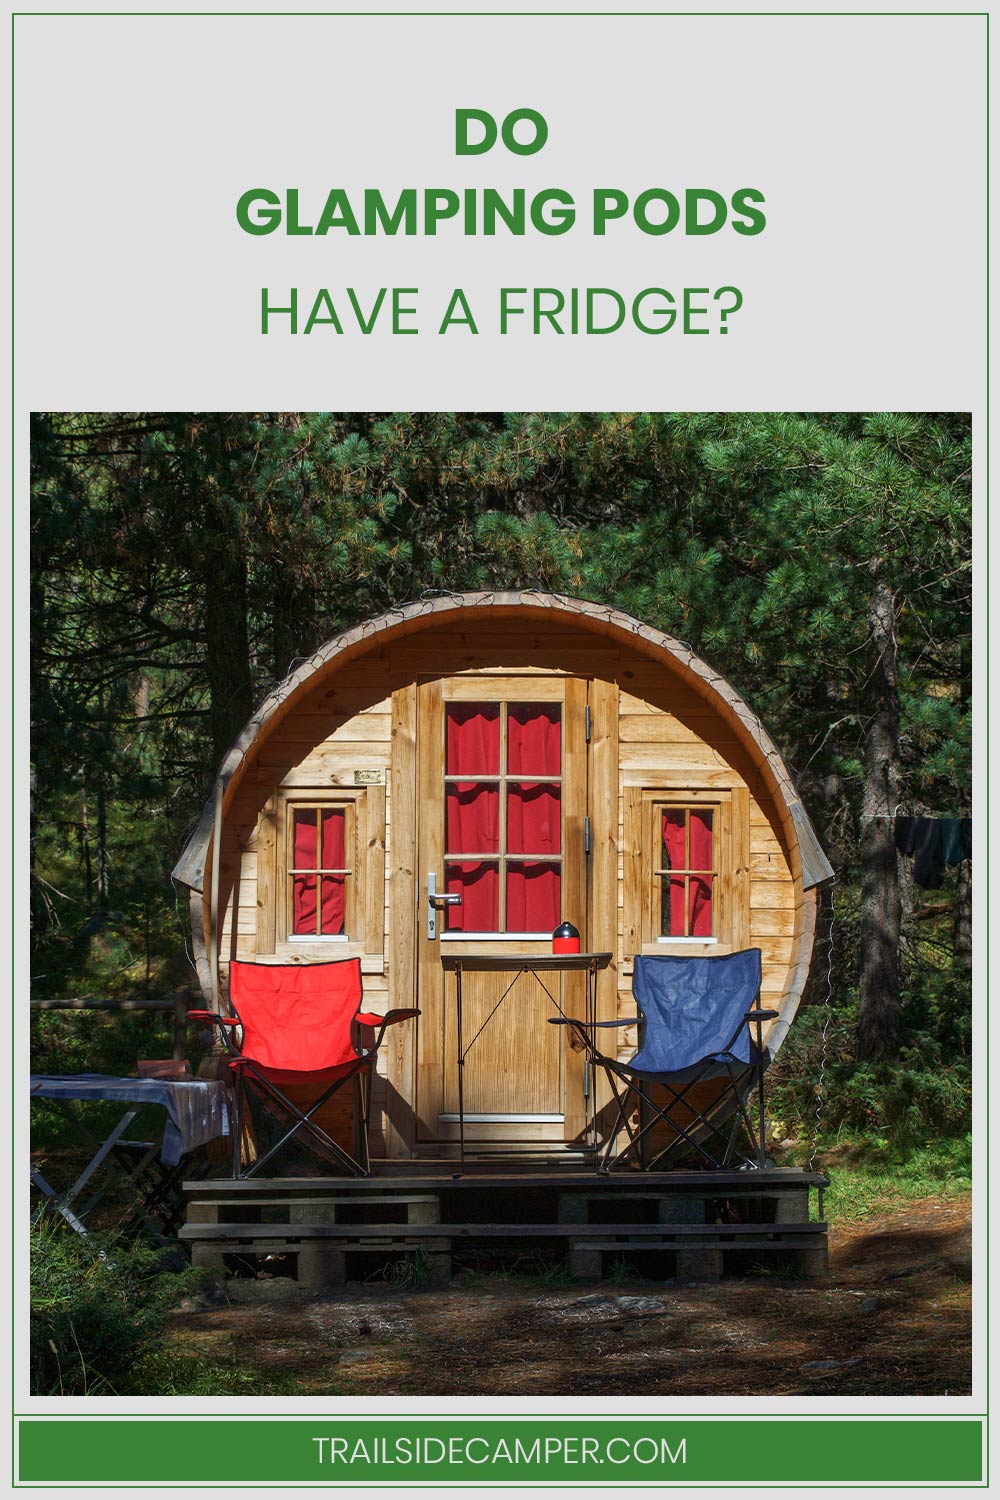 Do Glamping Pods Have a Fridge?